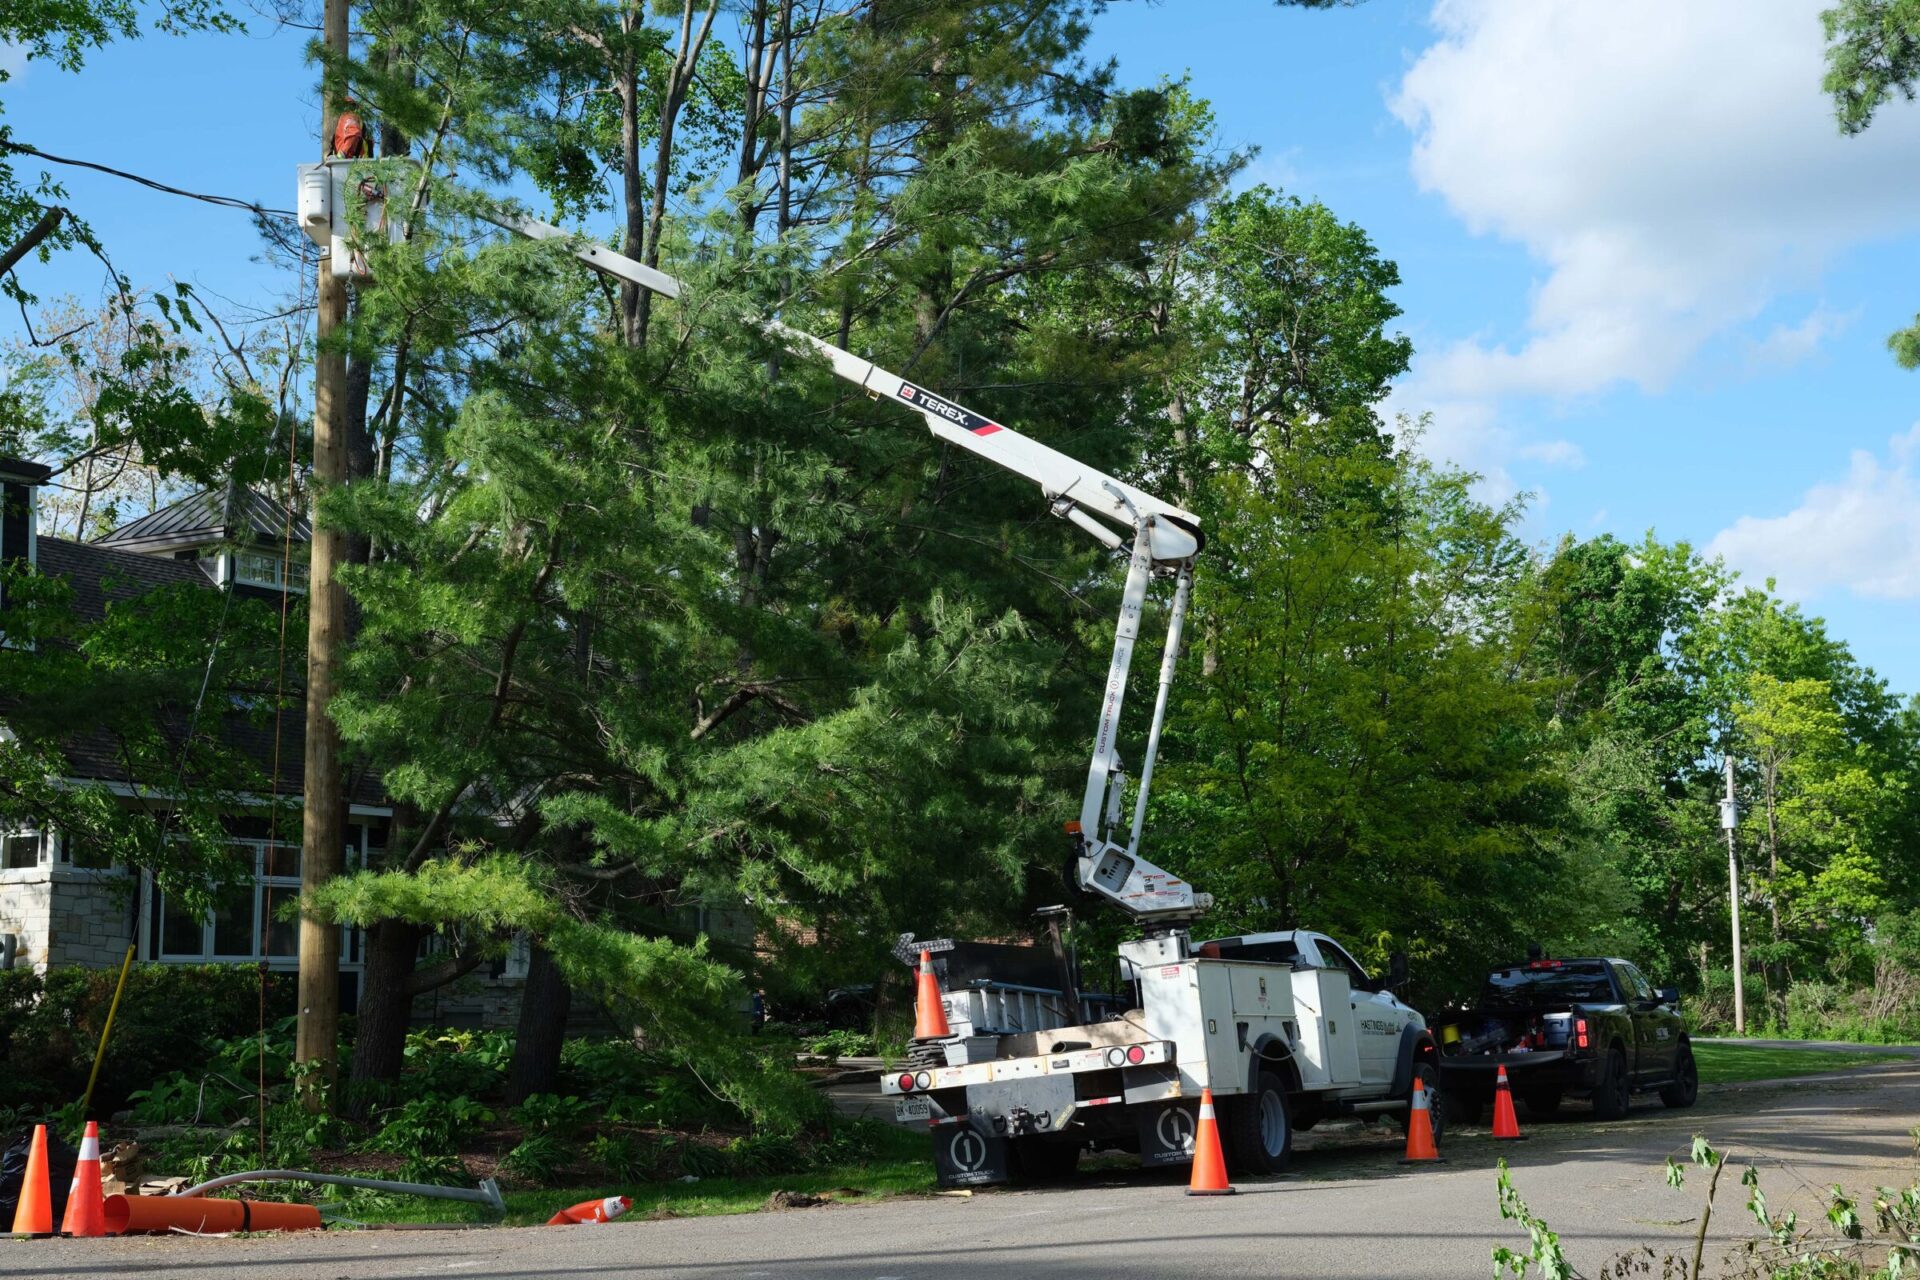 A person is working at height from a bucket truck near trees and utility poles, with orange traffic cones marking the area for safety.